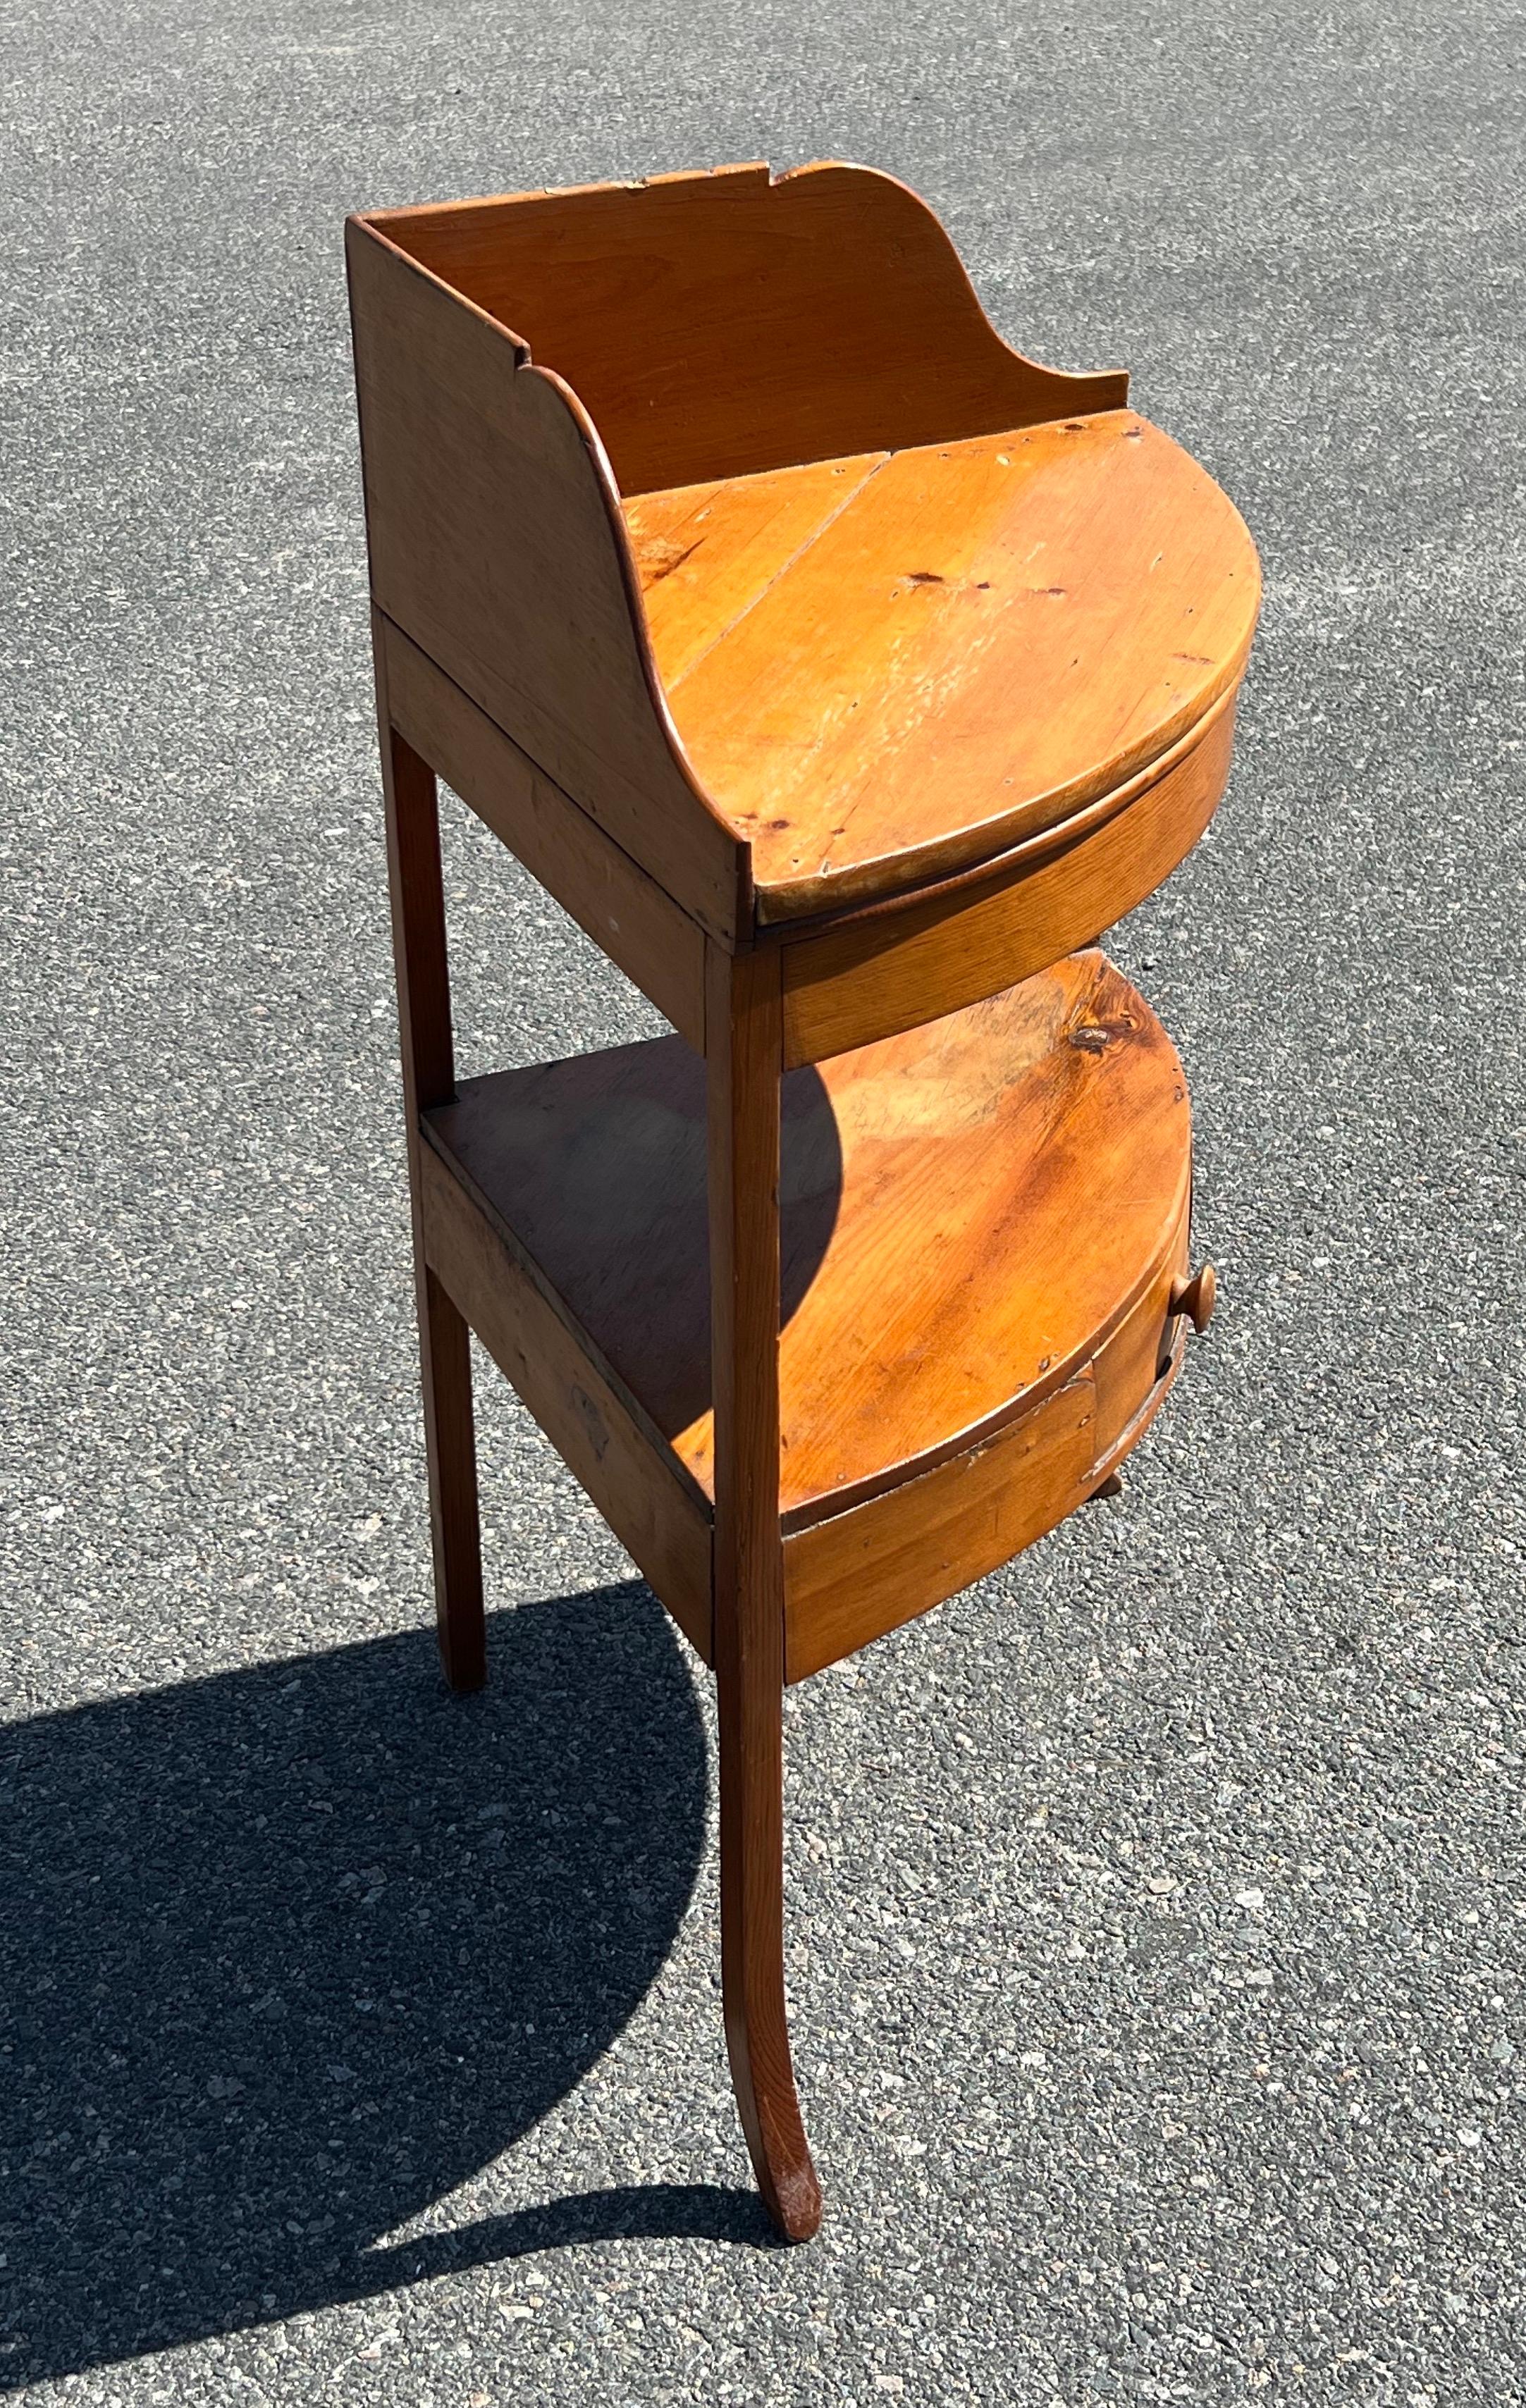 19th century yellow pine two tier corner washstand with dovetail-joined backsplash, single lower drawer, and delicately shaped front legs. Surface height 30 inches, 17.75 inches depth on either side from corner out.